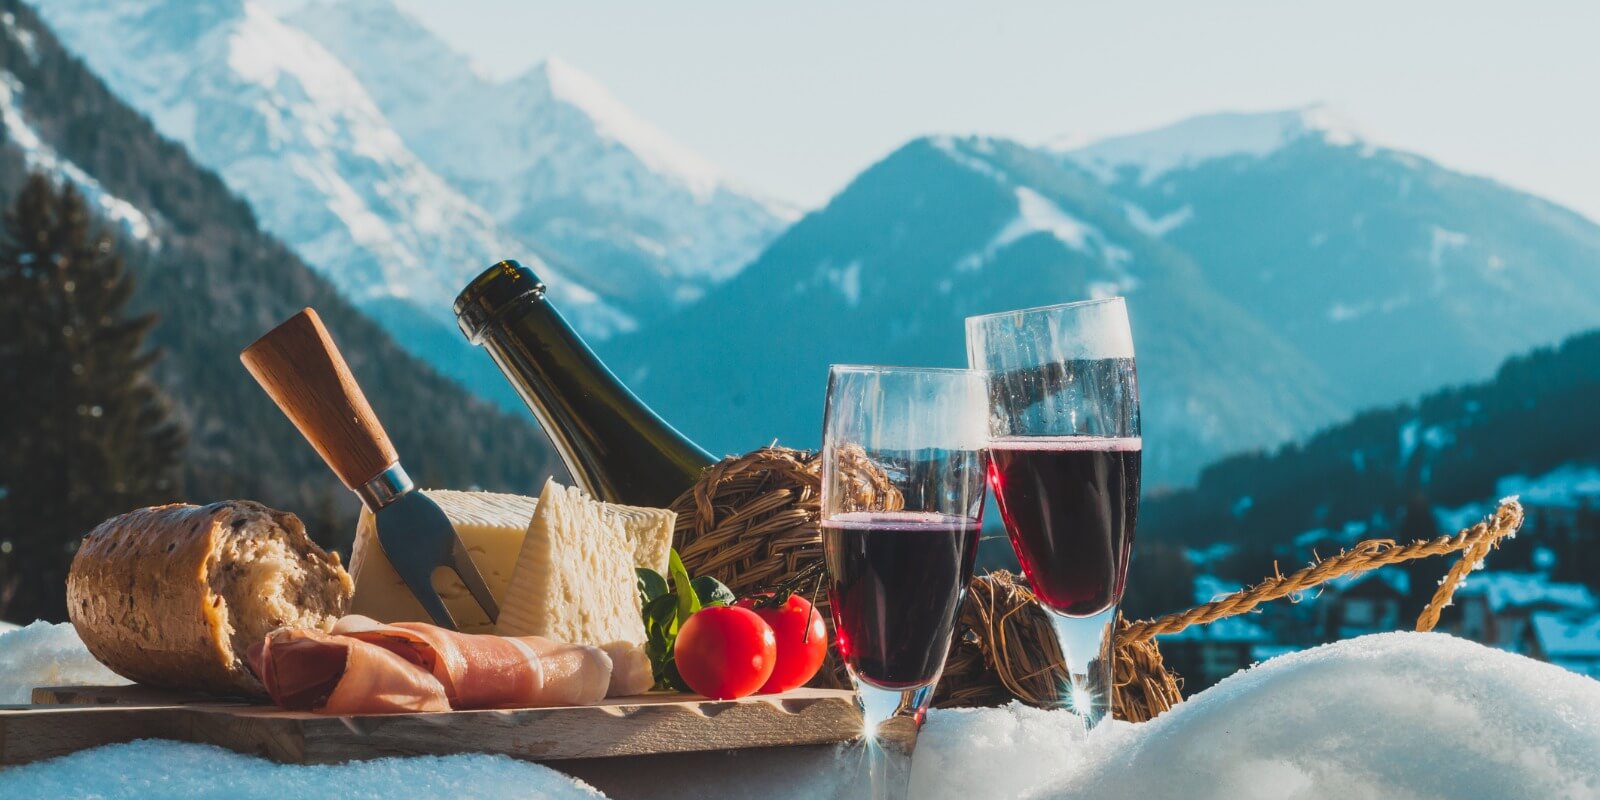 Outdoor winter picnic in italian countryside with mountains view